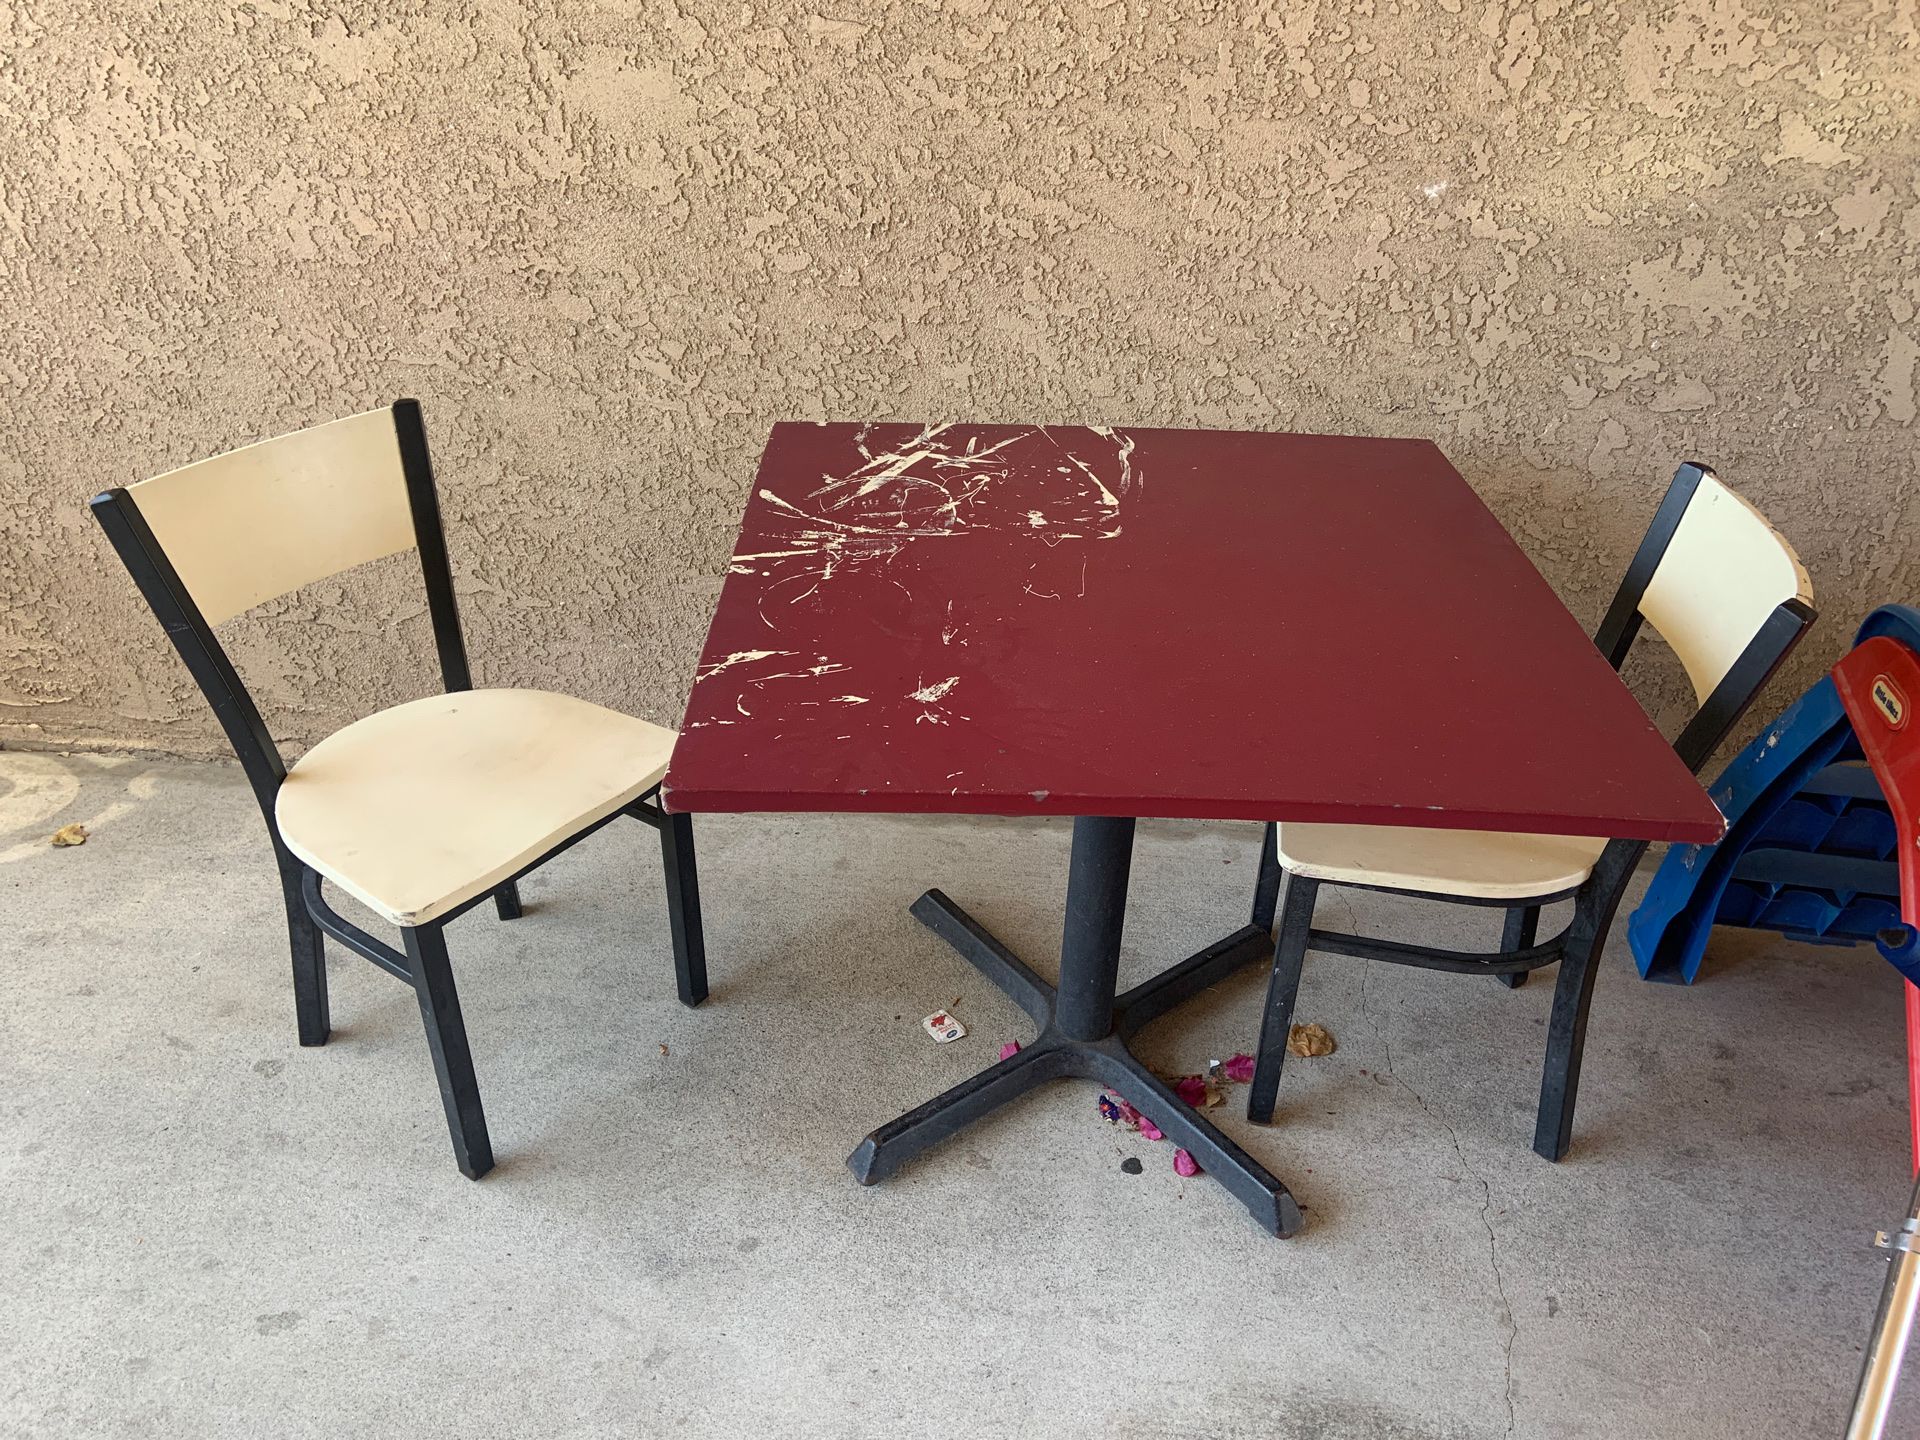 2 chairs and table